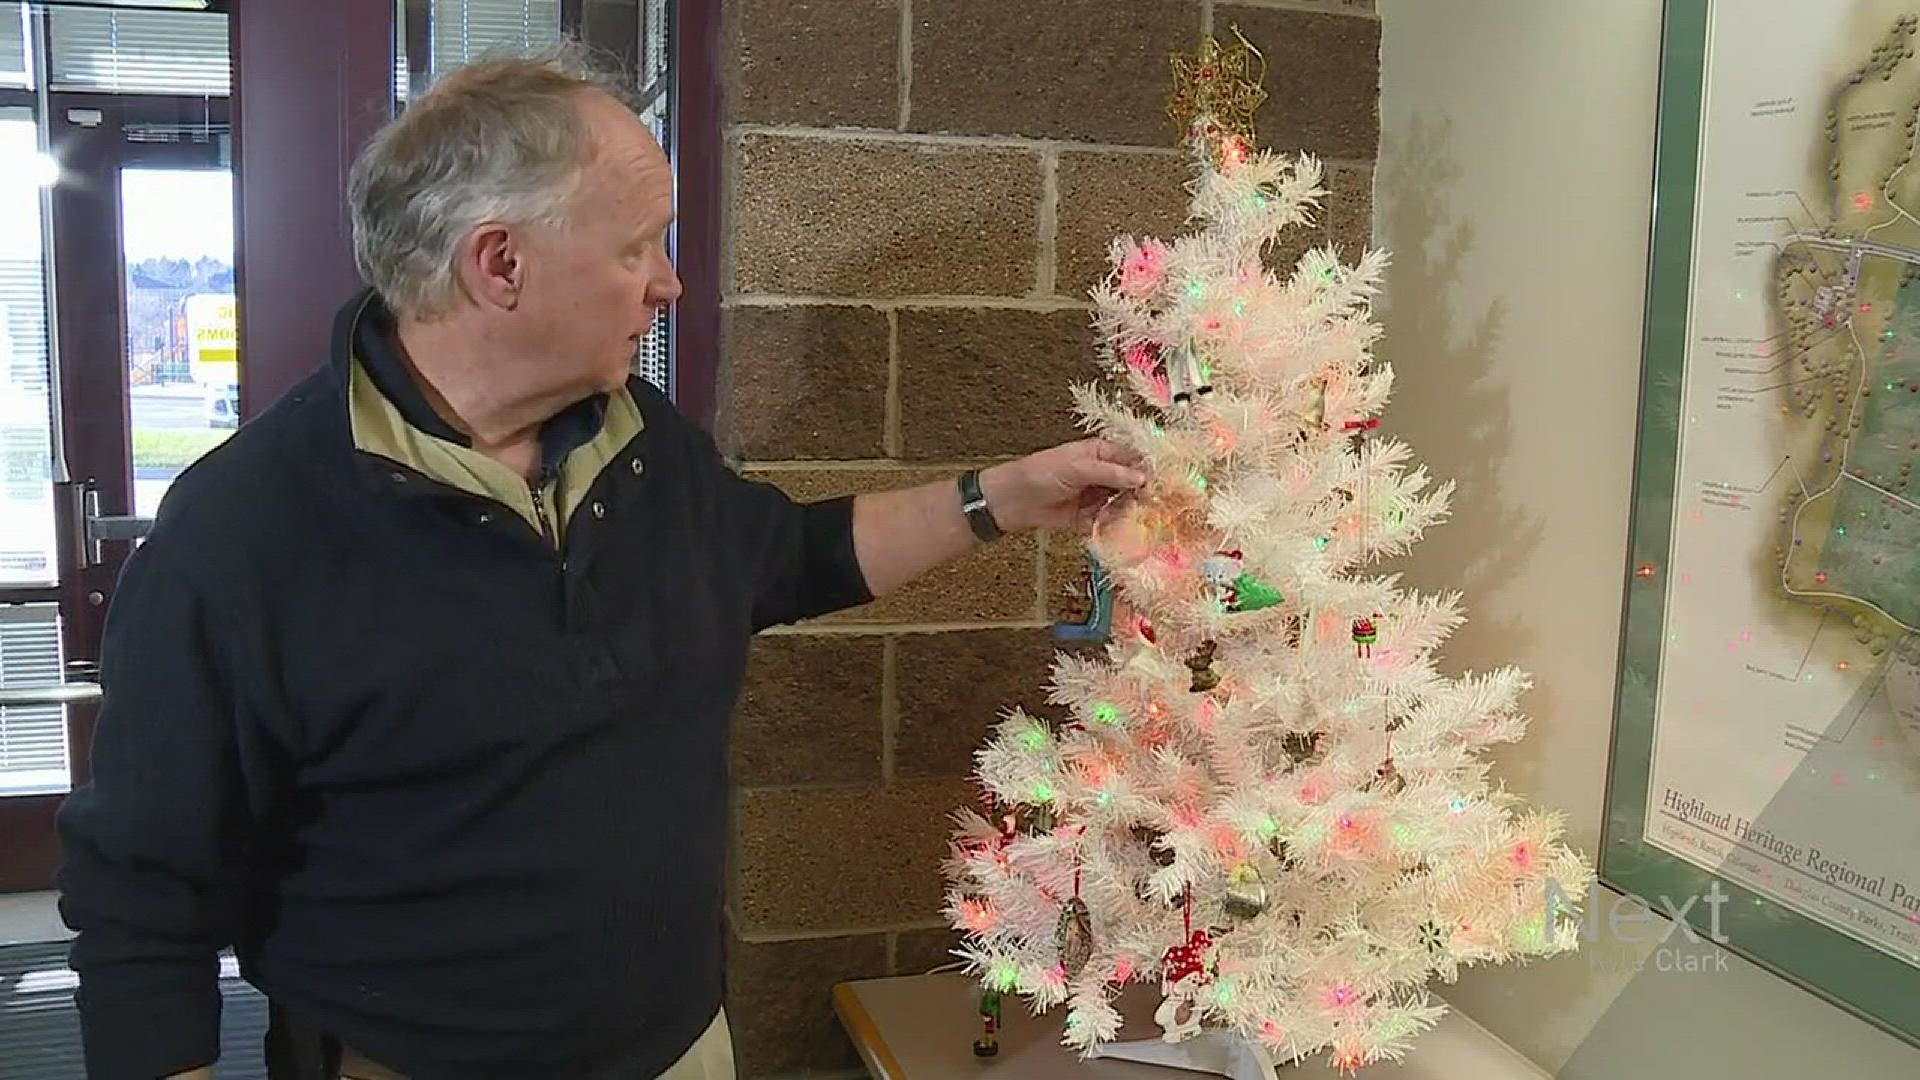 When people recycle their Christmas trees, every once in a while they leave an ornament on them. Douglas County doesn't throw them away, epecially if they see one that looks special. They save them with the hope that families will come claim their lost keepsakes.